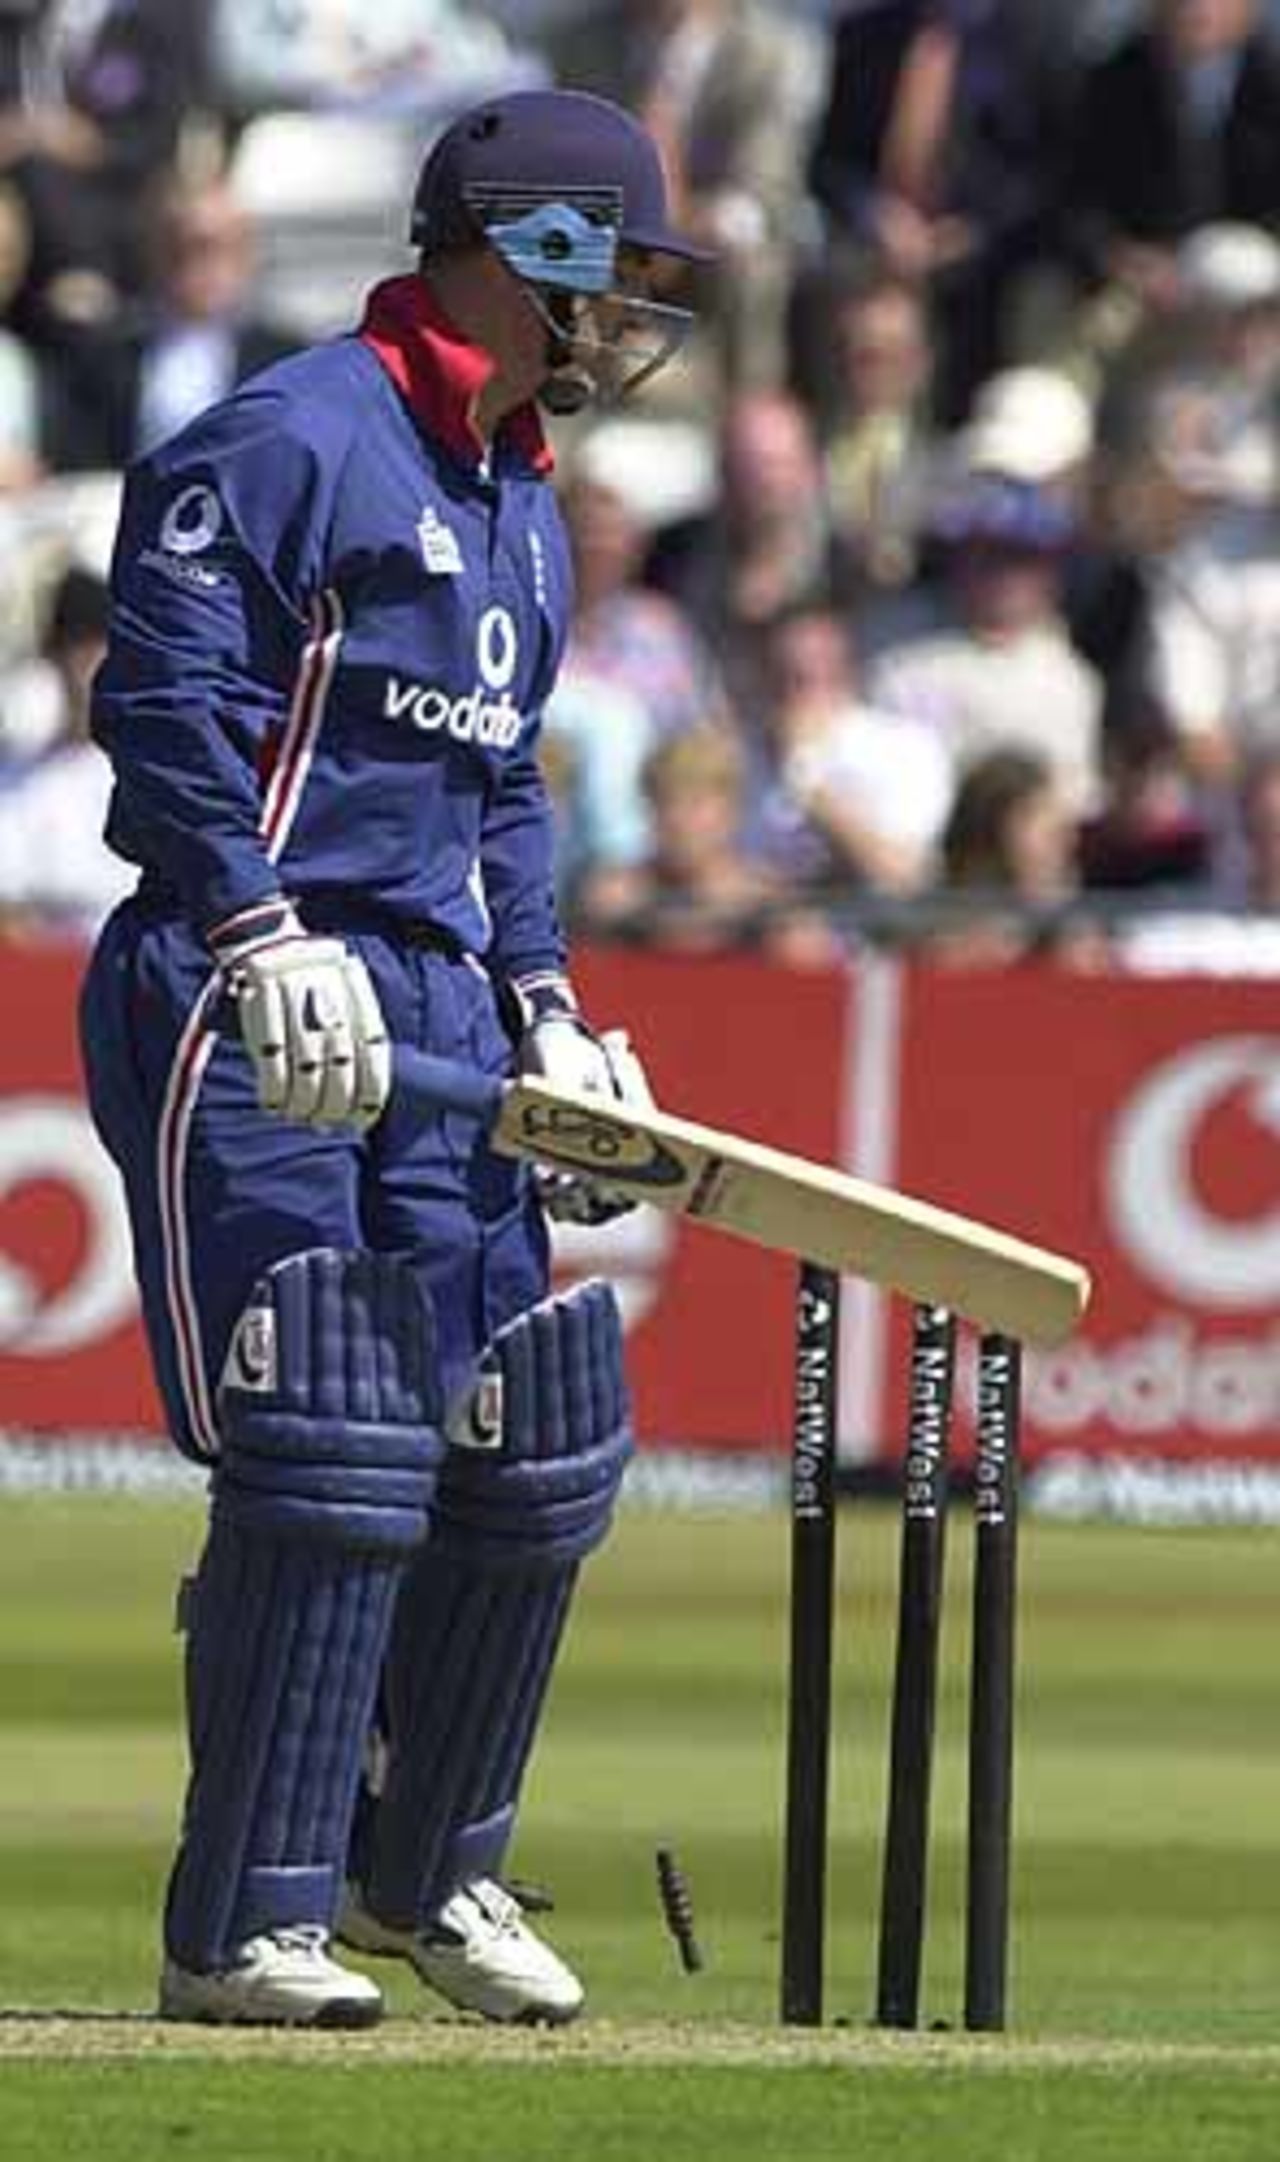 Graham Thorpe just cannot believe that he has been bowled for 18, England v Sri Lanka at Trent Bridge